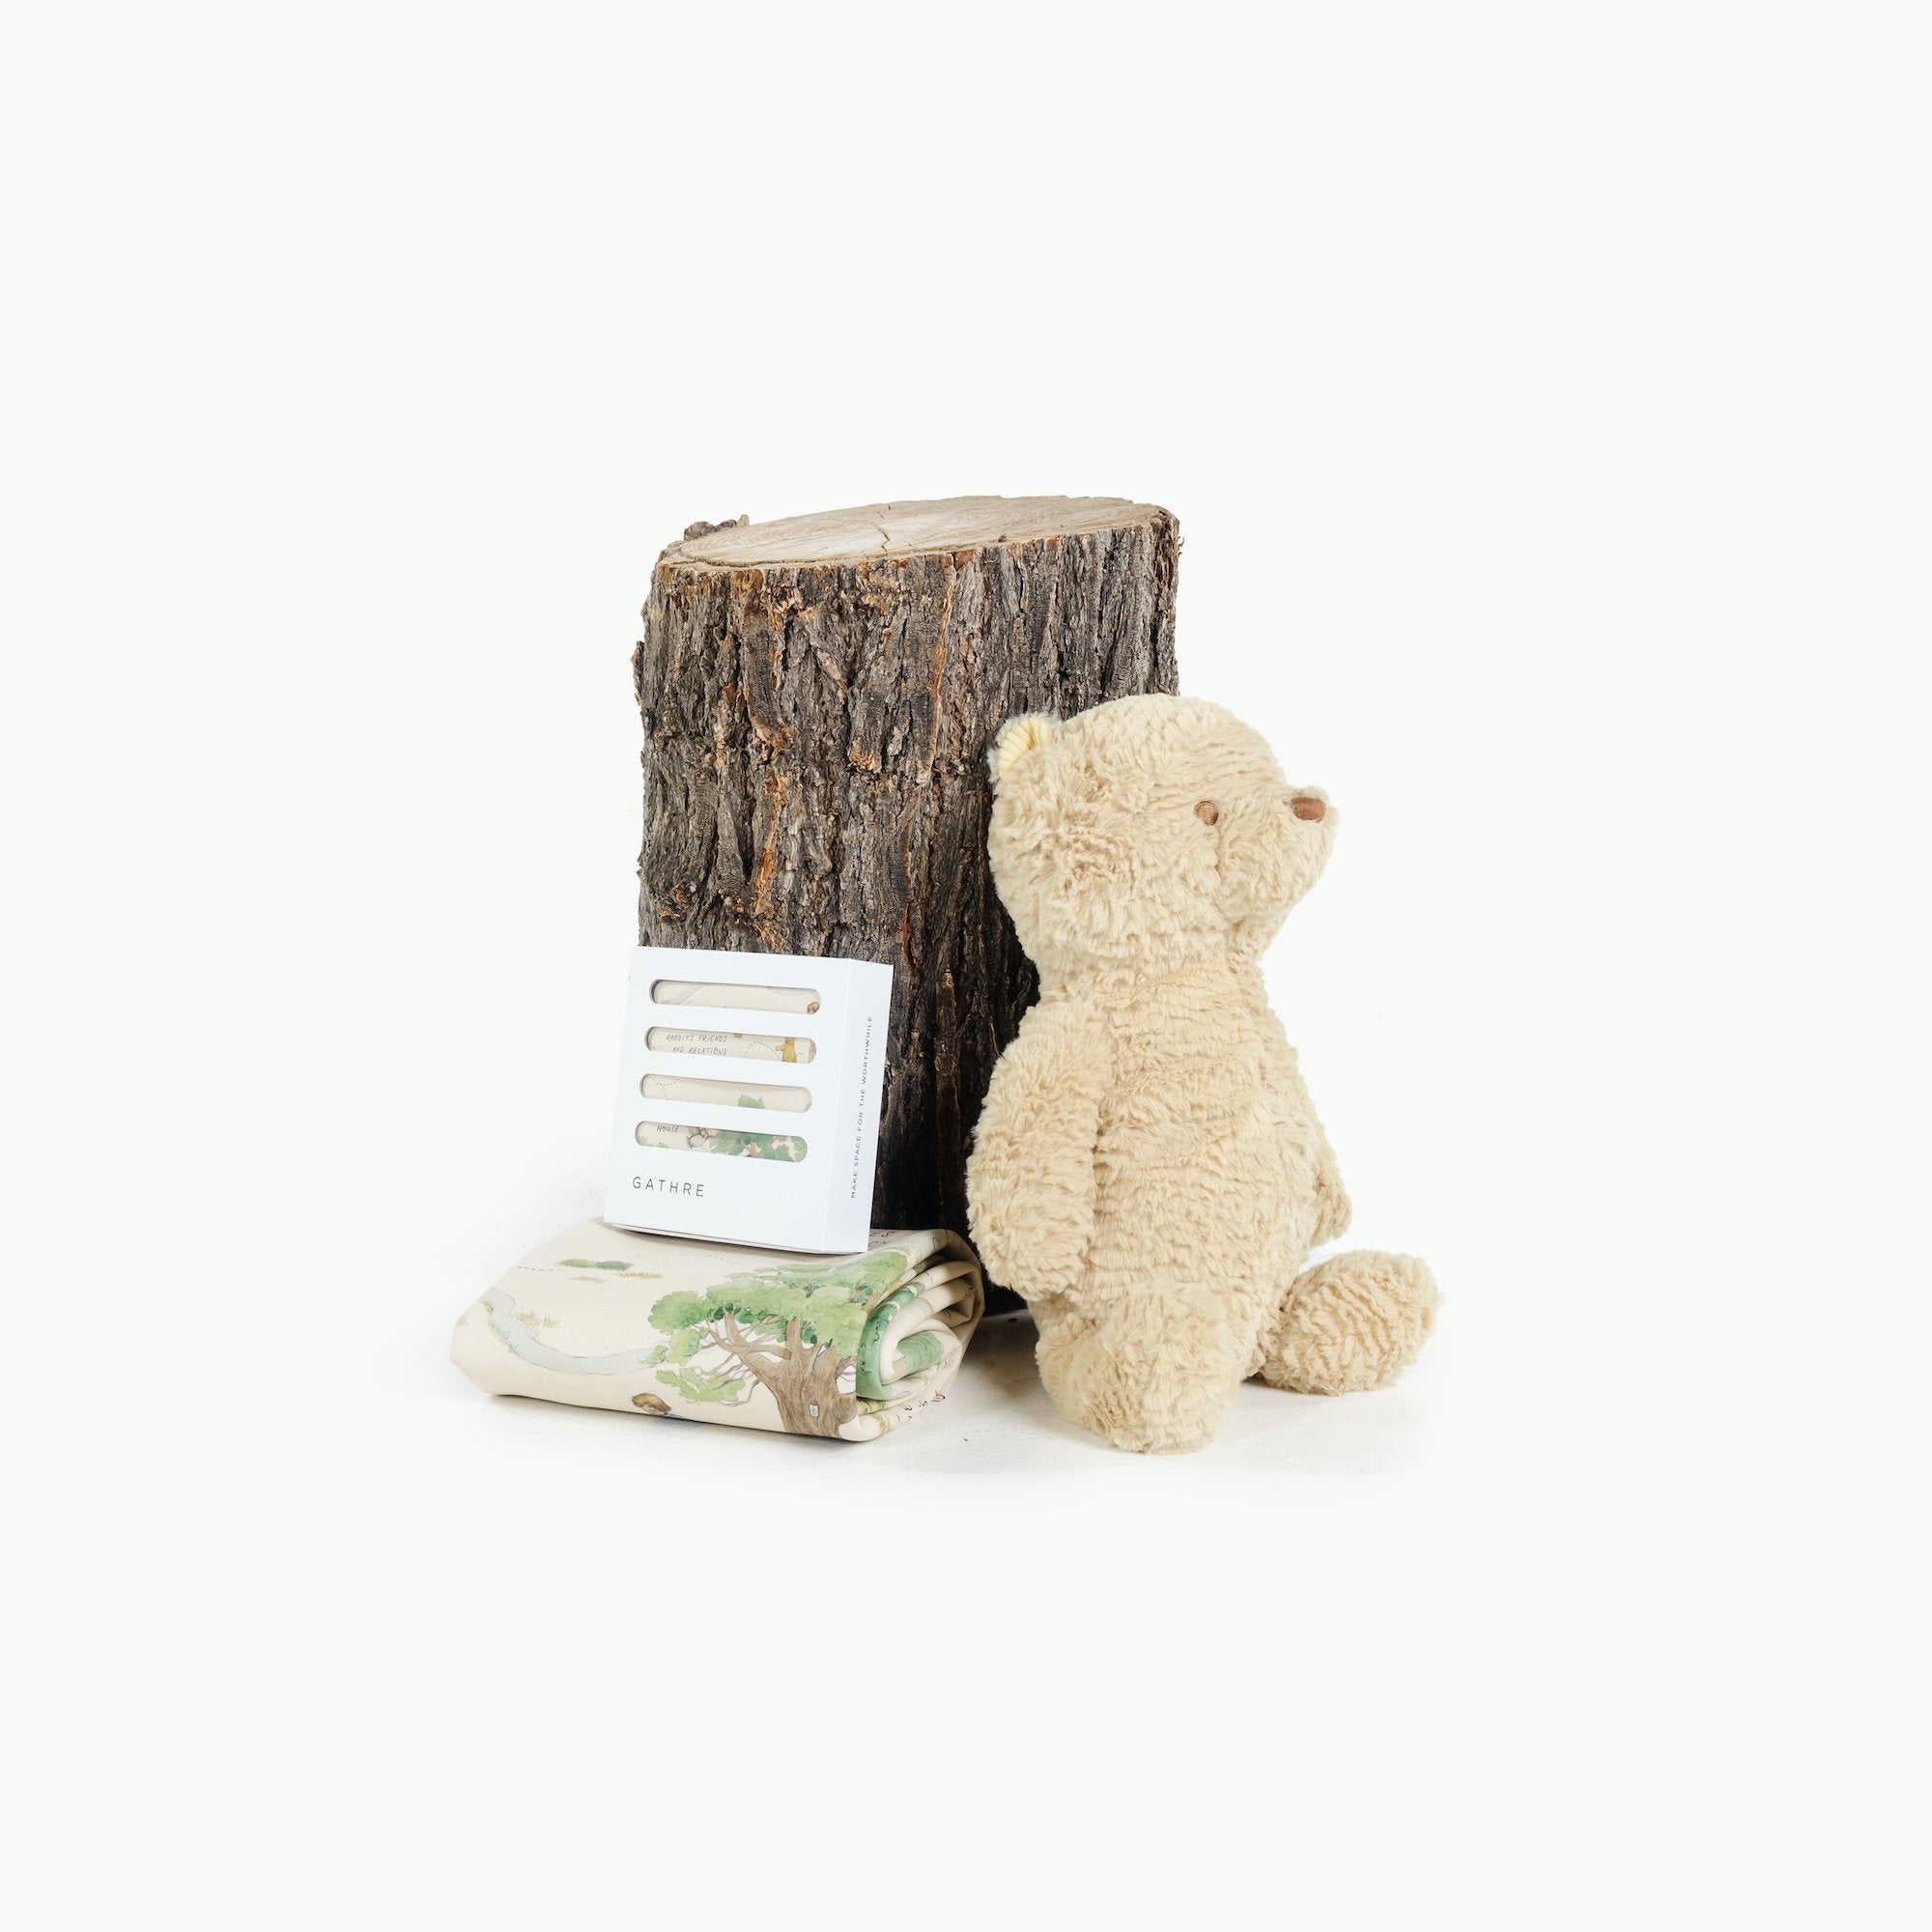 Hundred Acre Wood (on sale)@Hundred Acre Wood Mats leaning on a log near a teddy bear